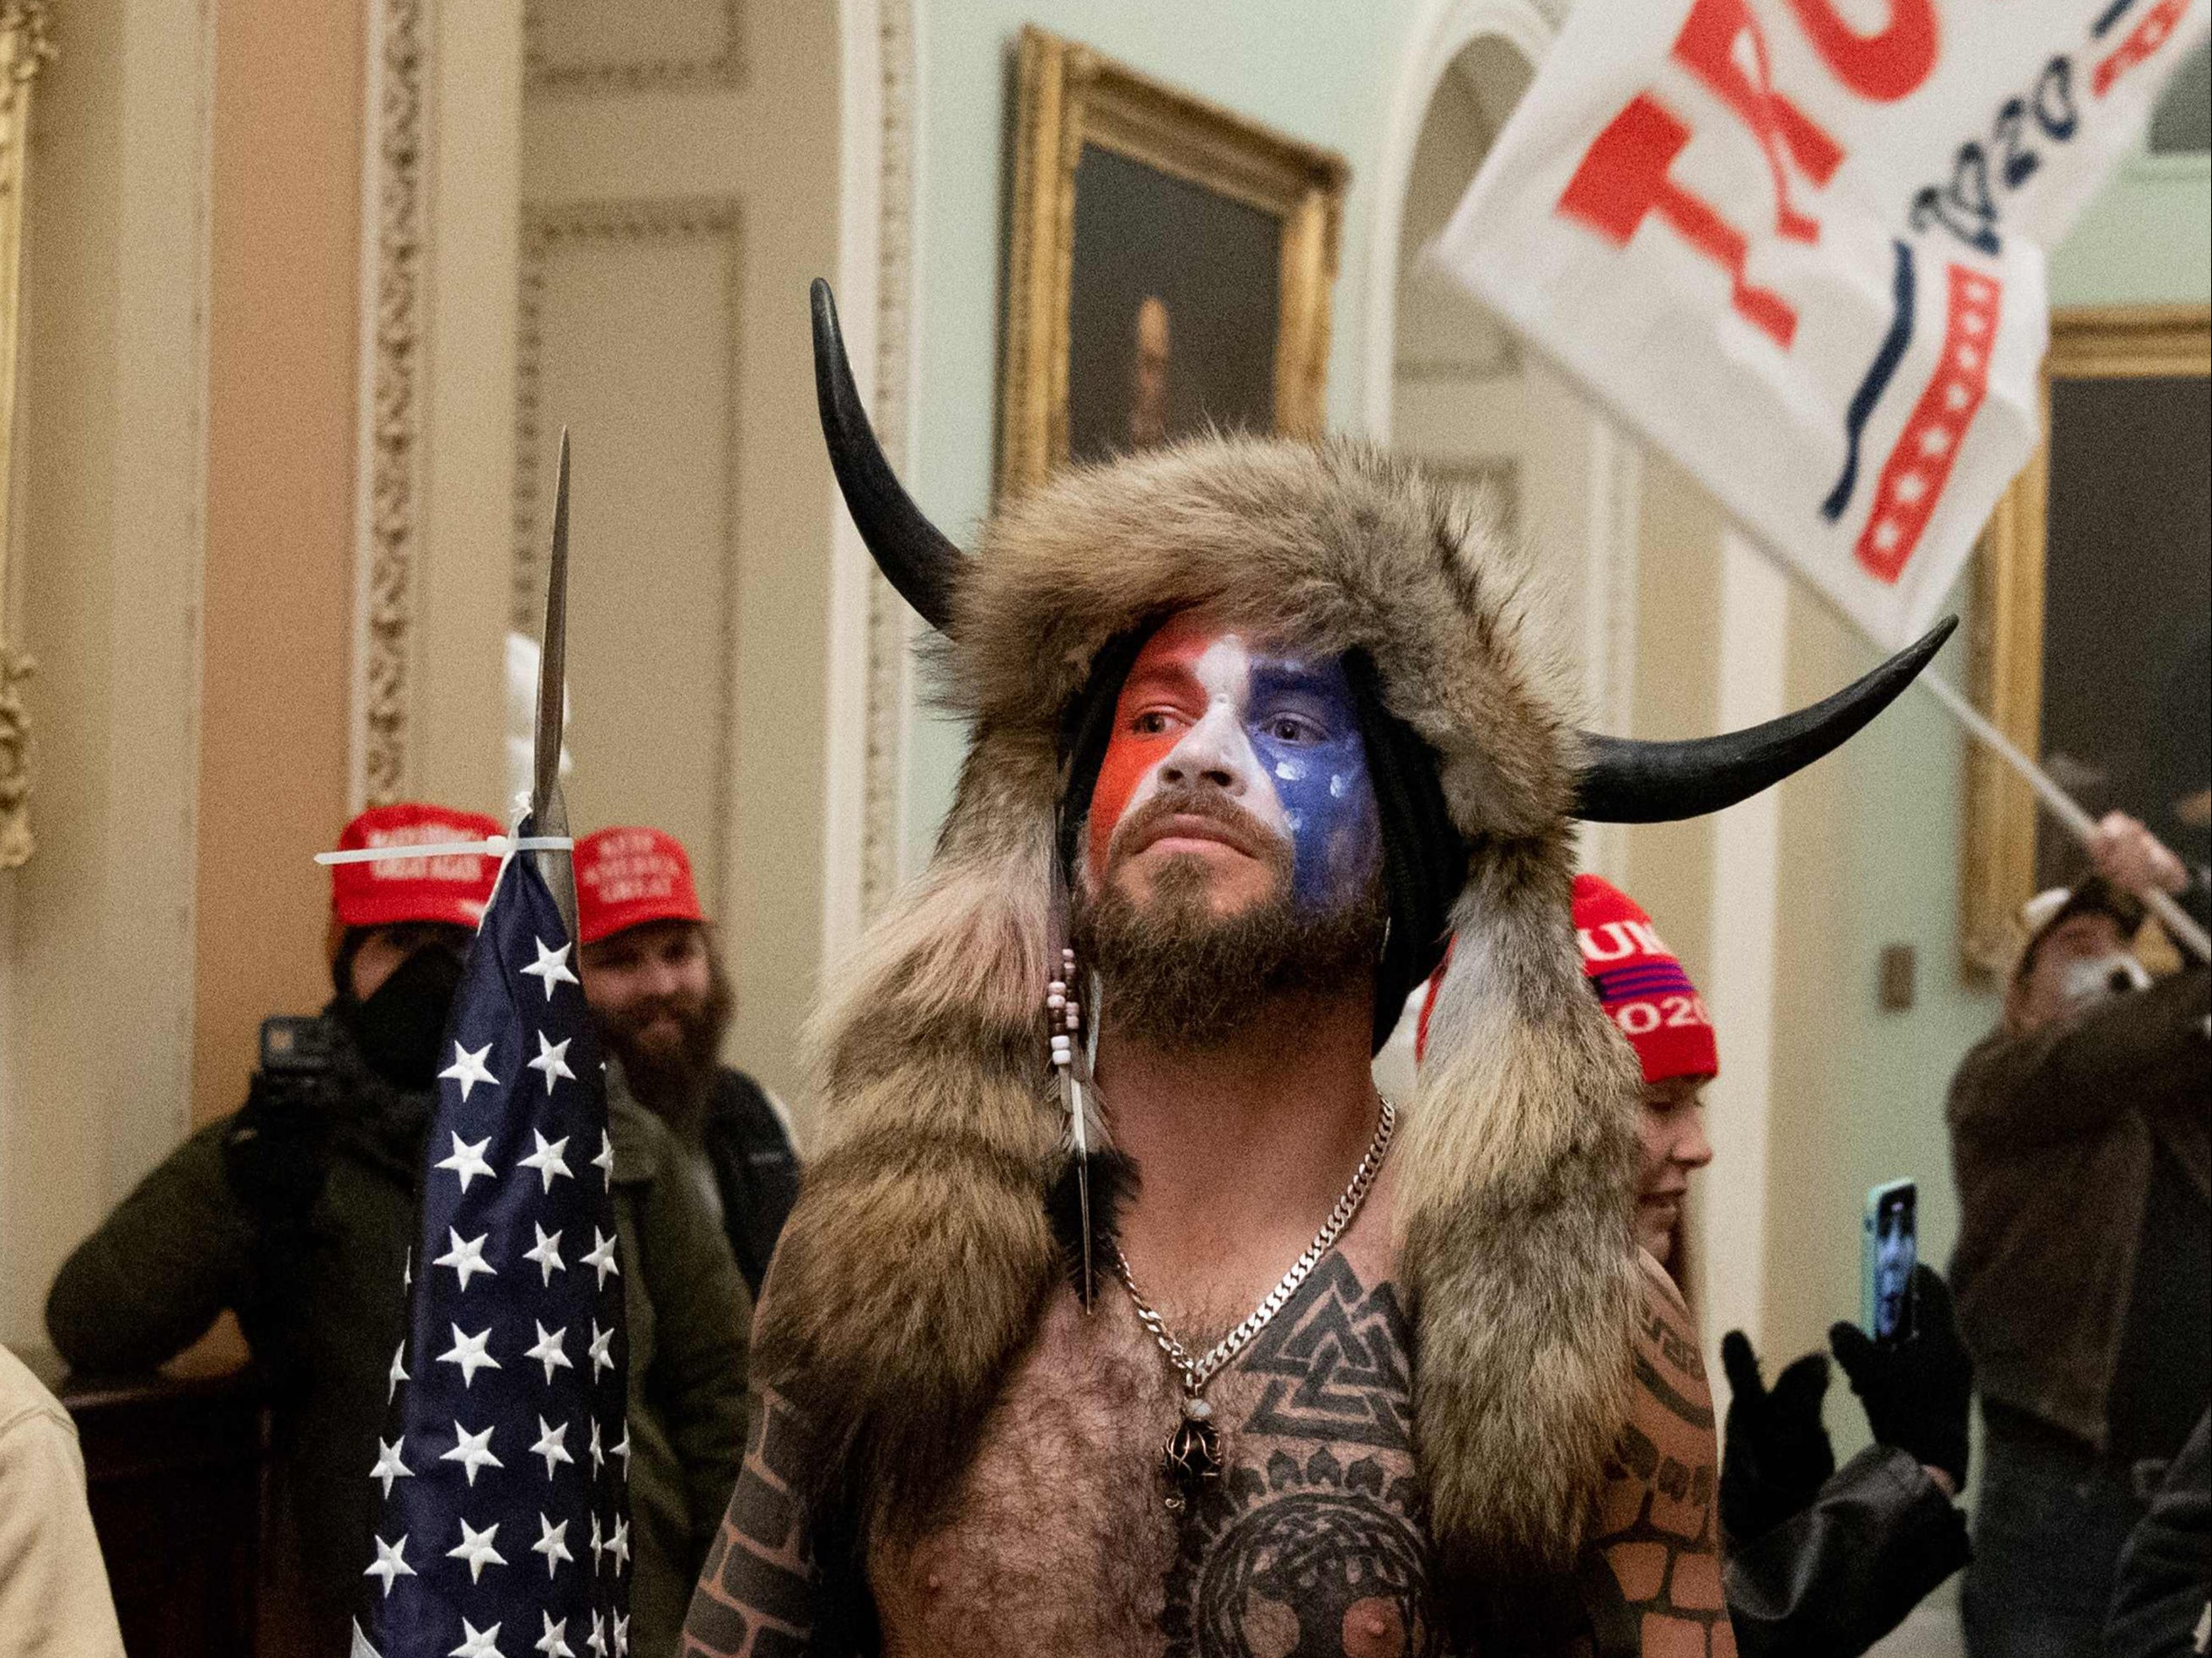 Jacob Chansley, the ‘QAnon Shaman’, in the US Capitol on 6 January 2021